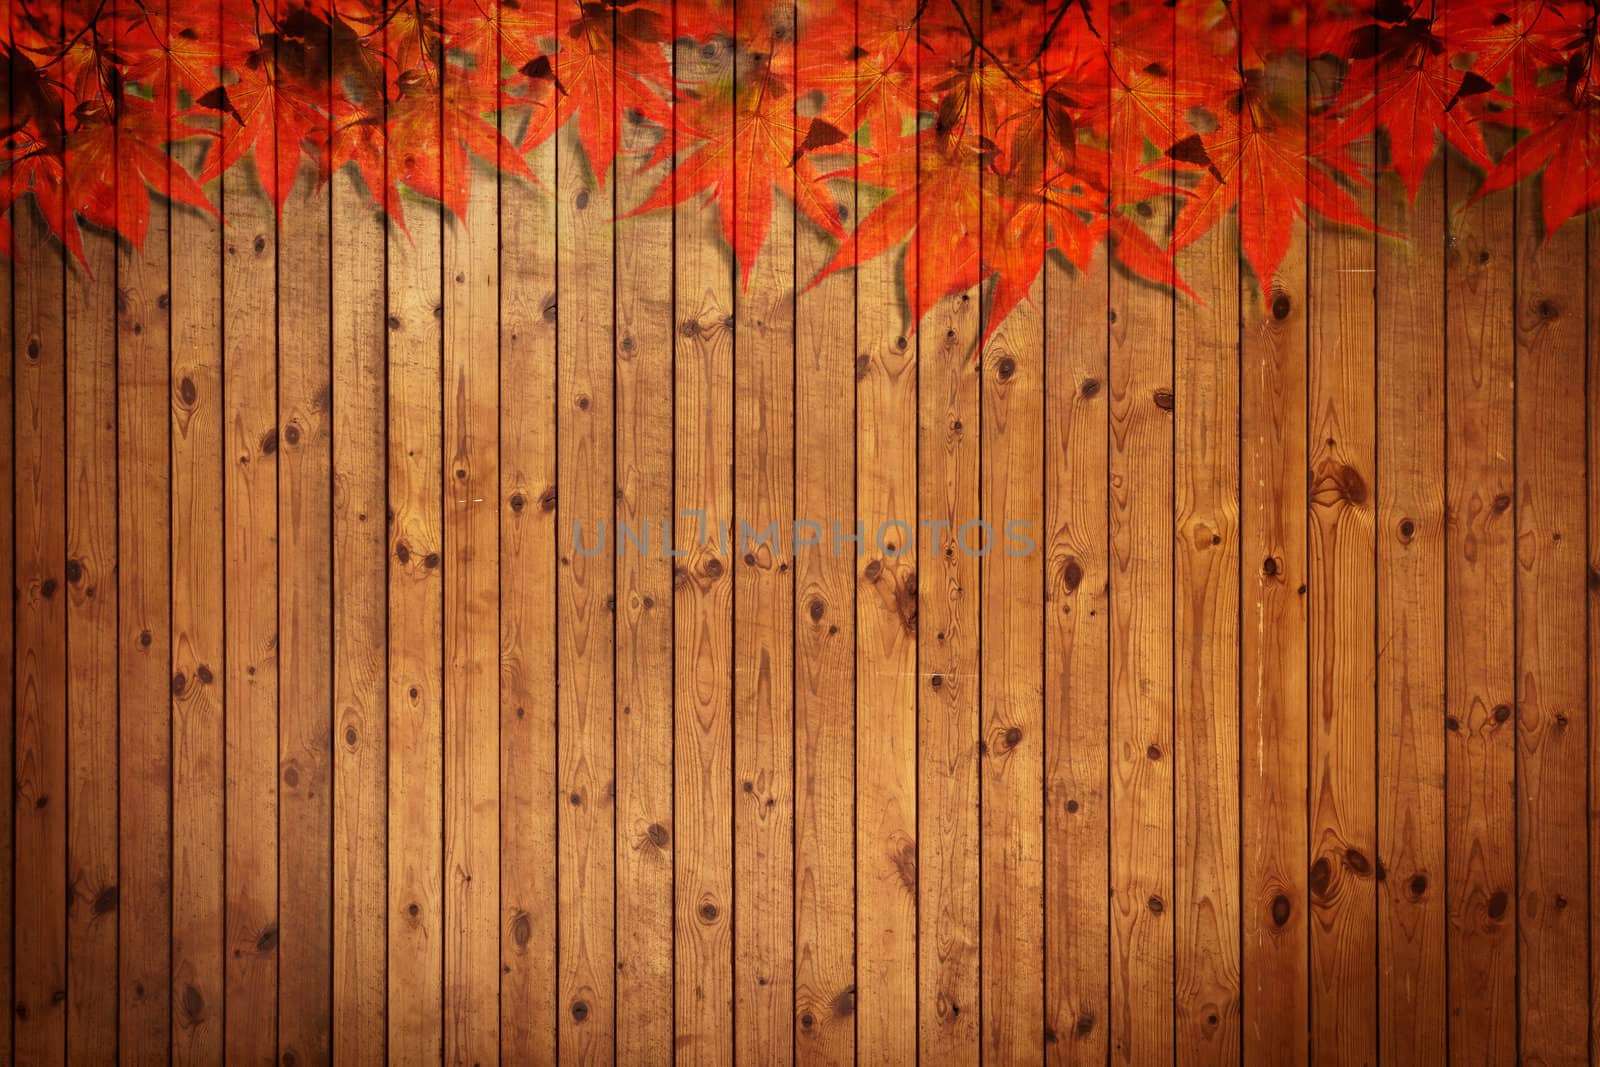 Old grung Wood Texture with leaves use for background by Suriyaphoto